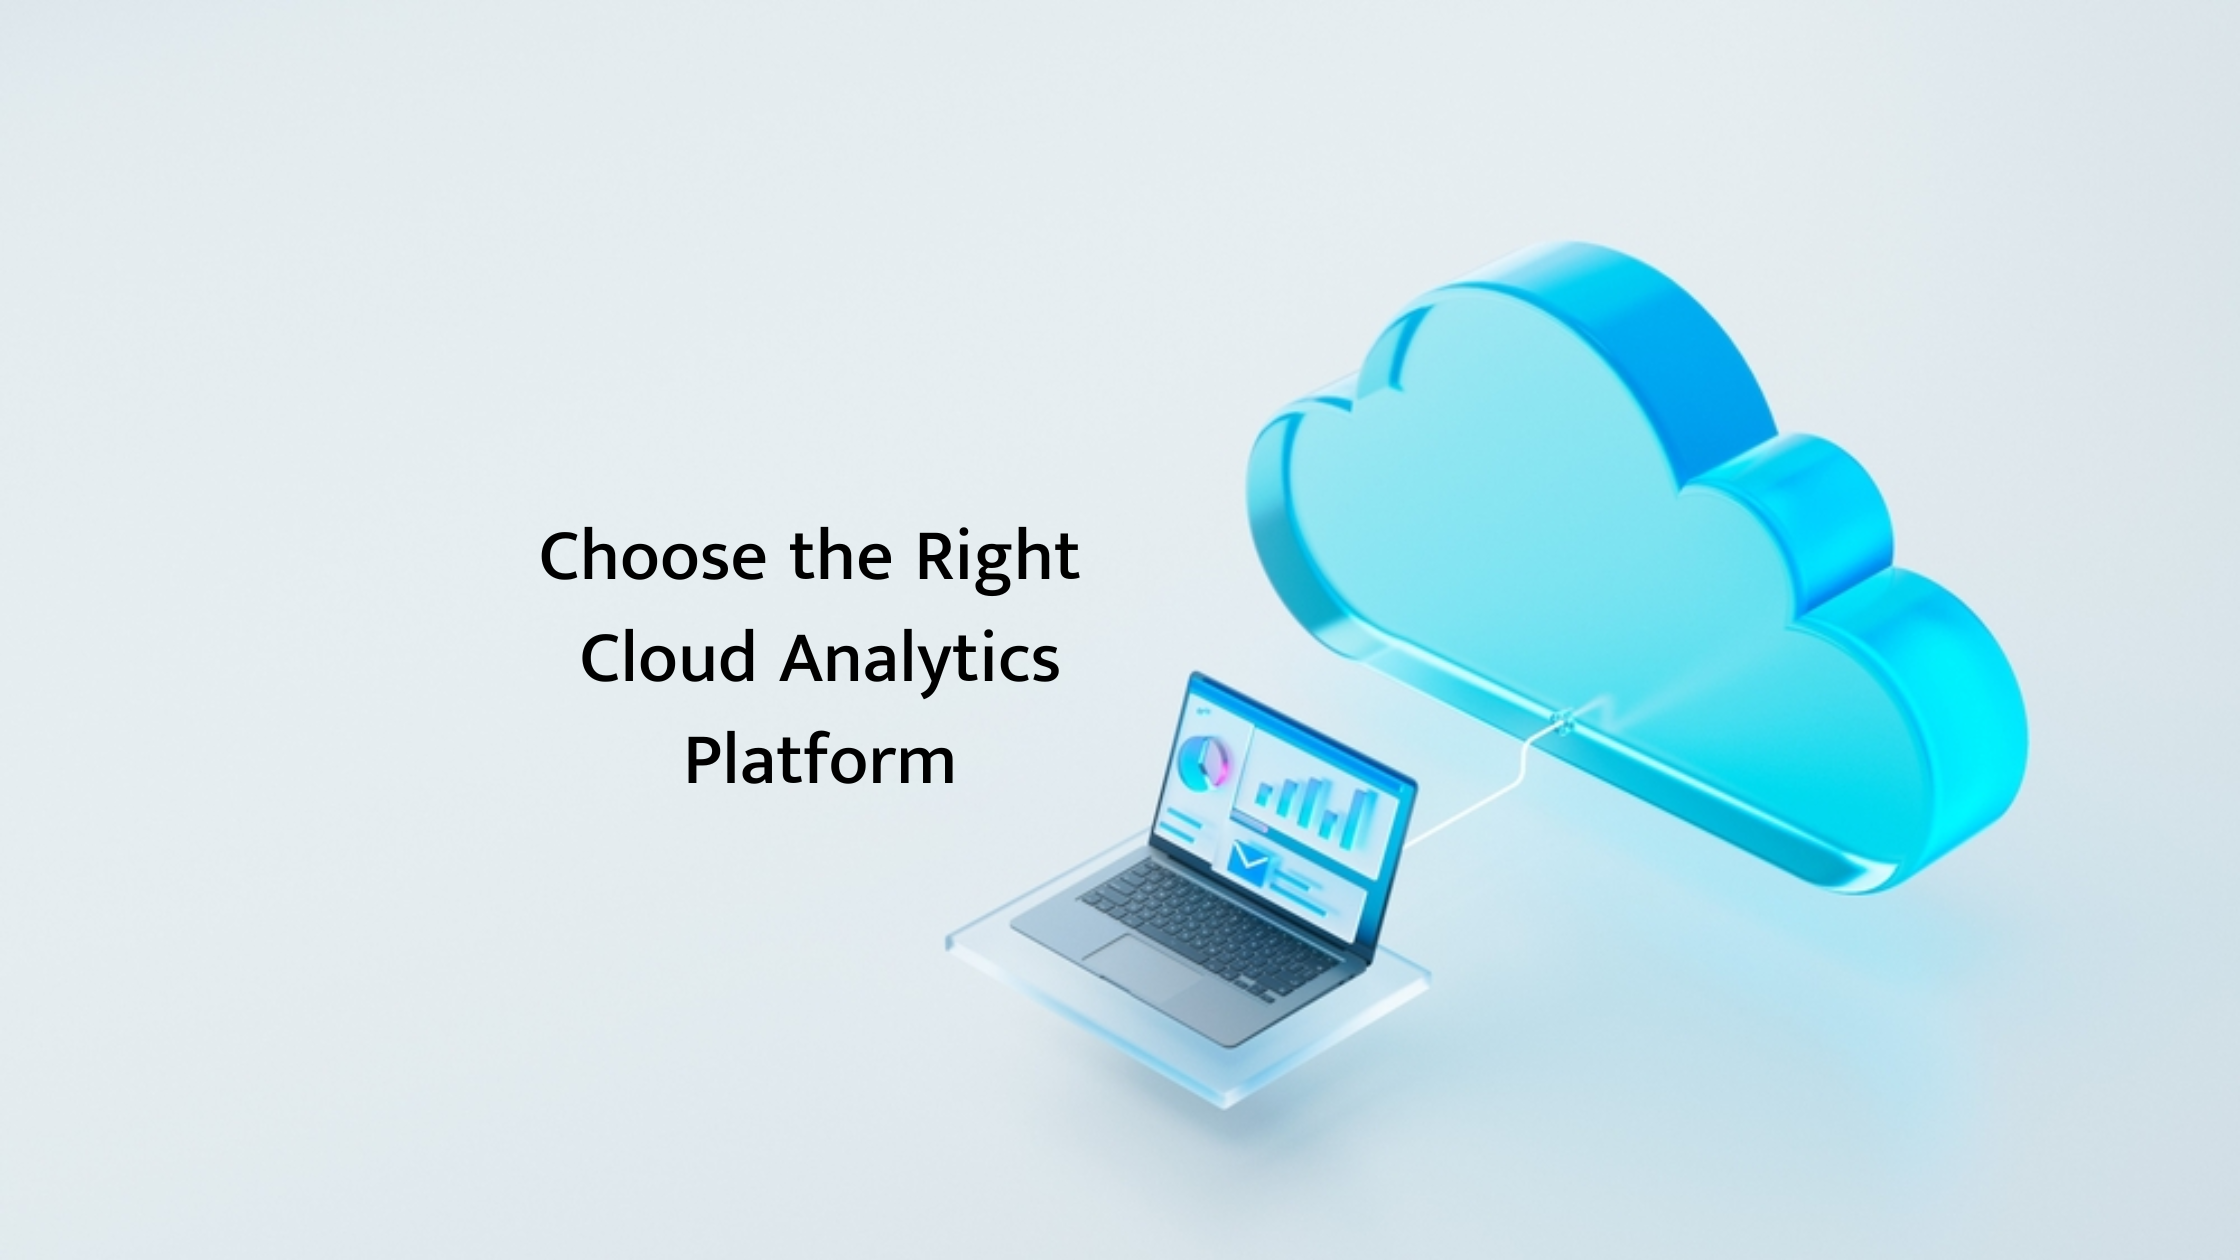 How to choose the right cloud analytics platform?